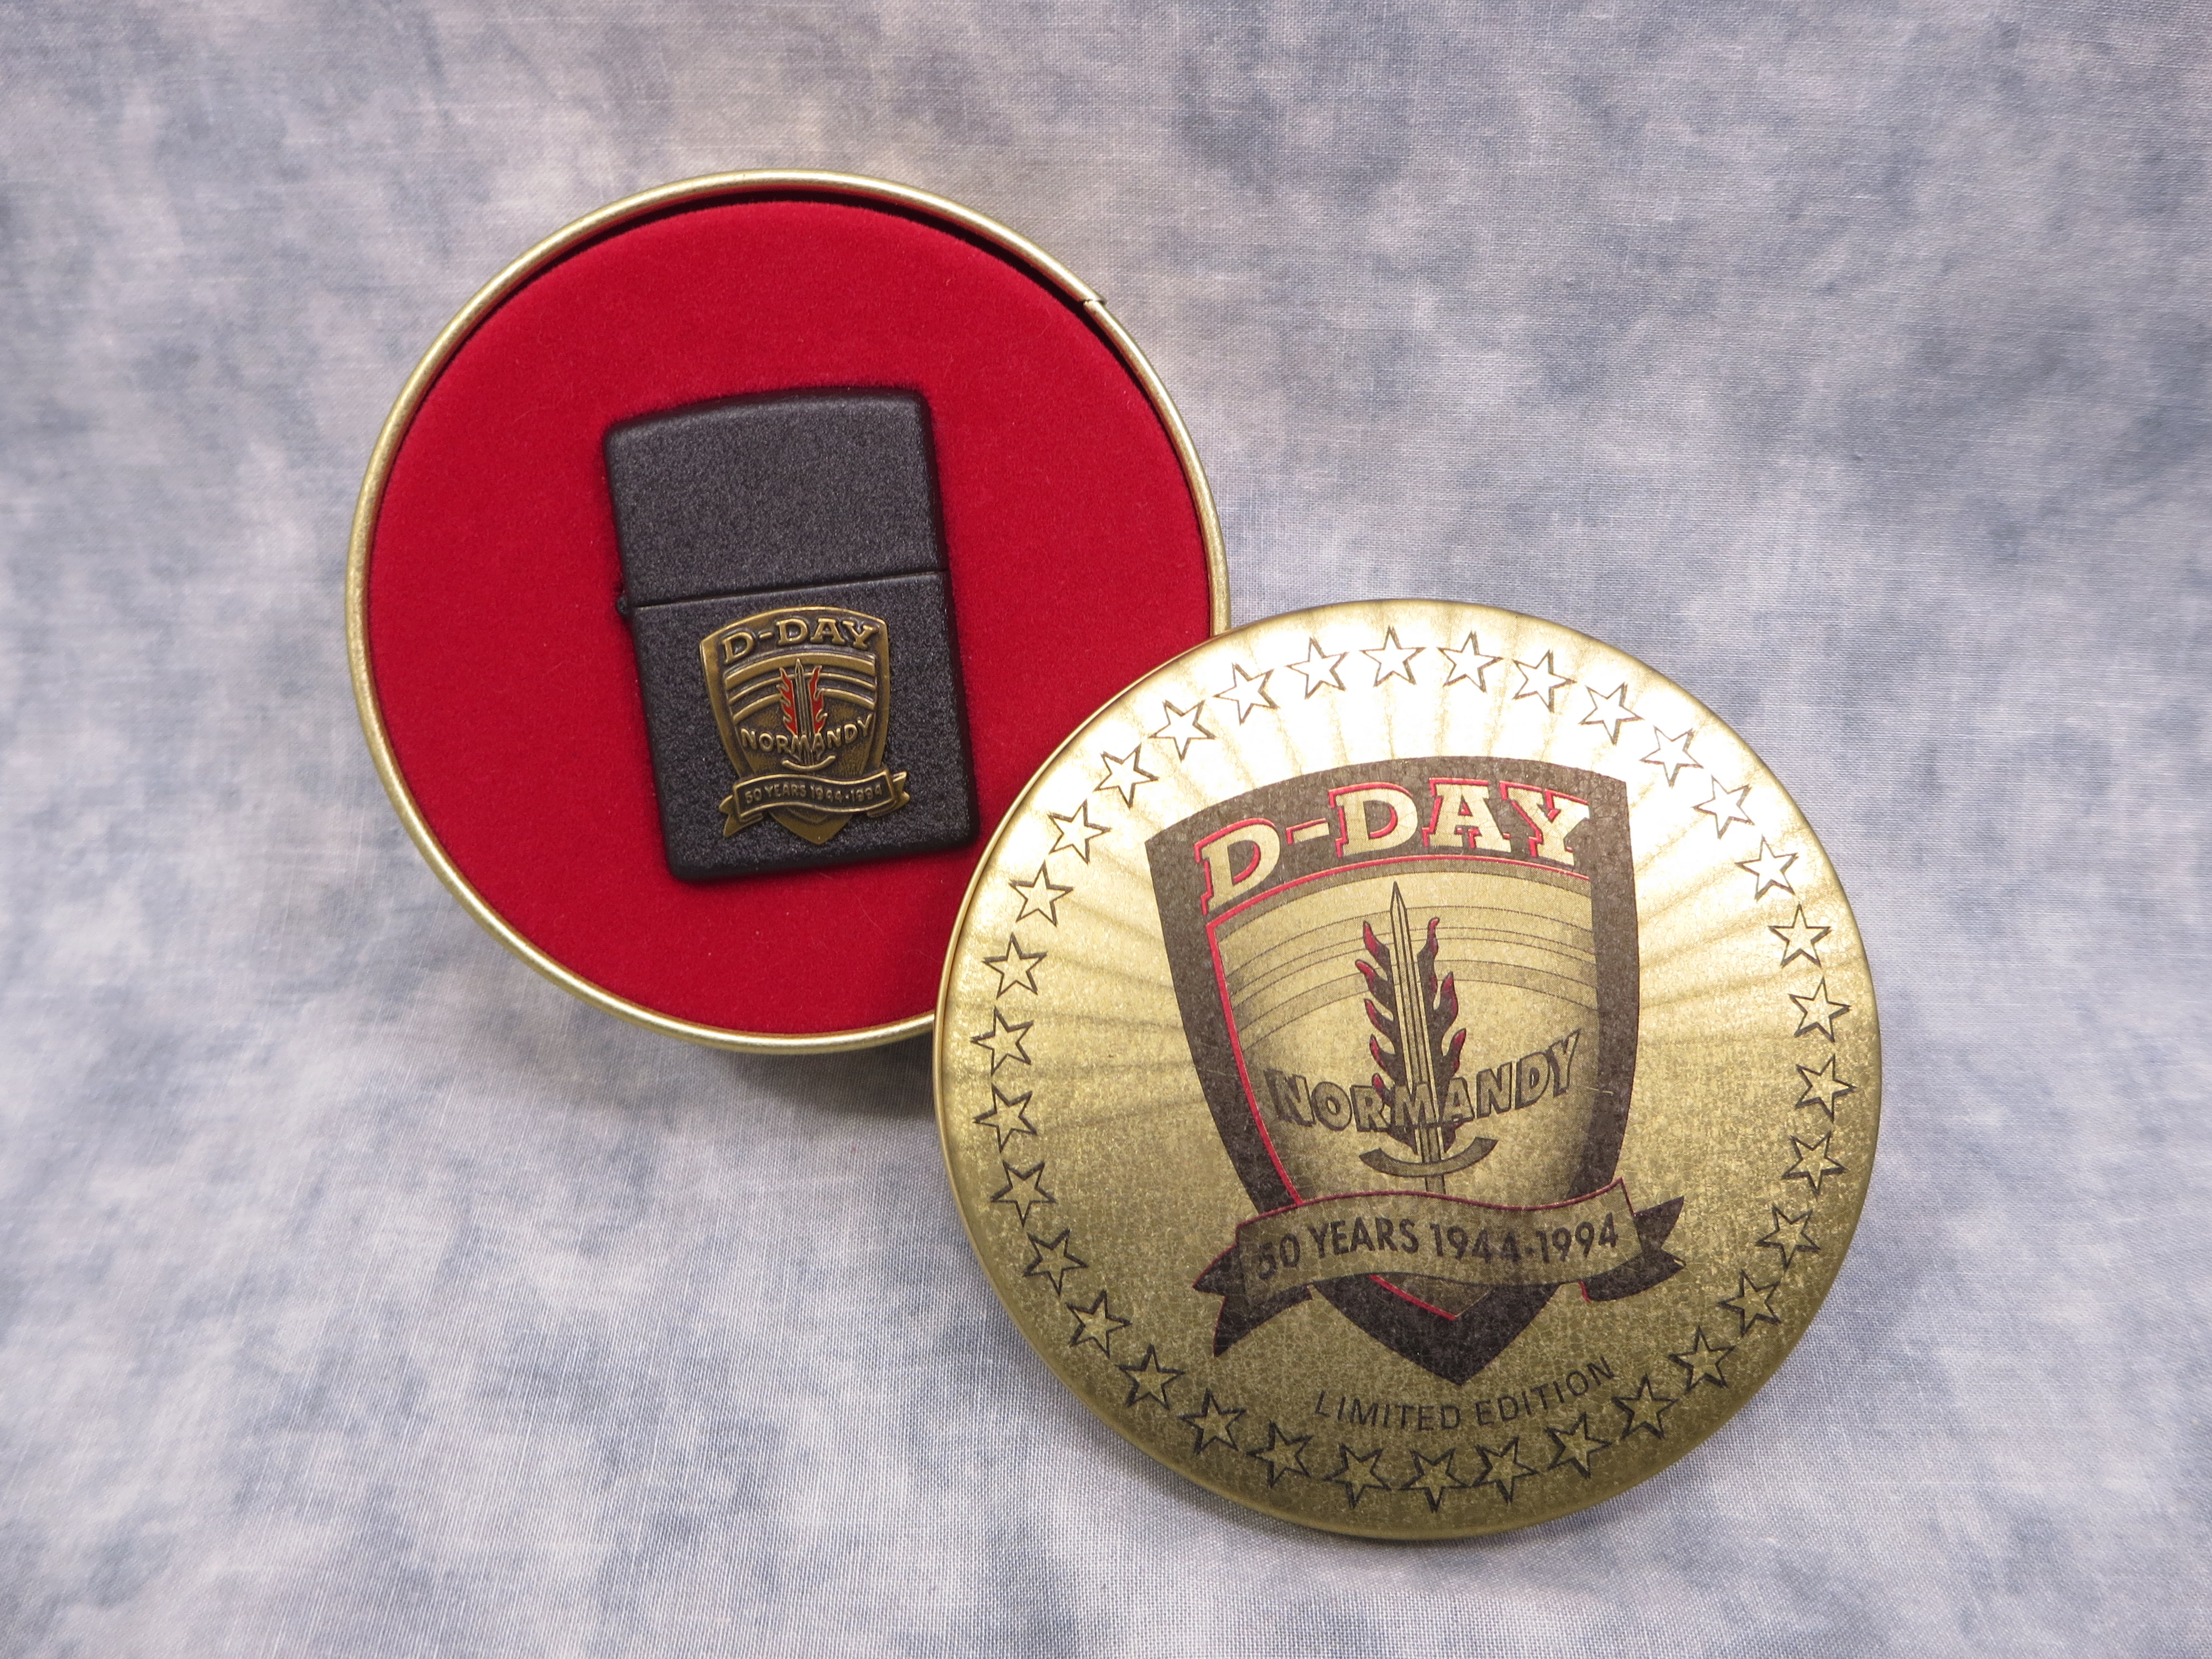 Value of D-DAY 50TH ANNIVERSARY Limited Edition Lighter in Tin